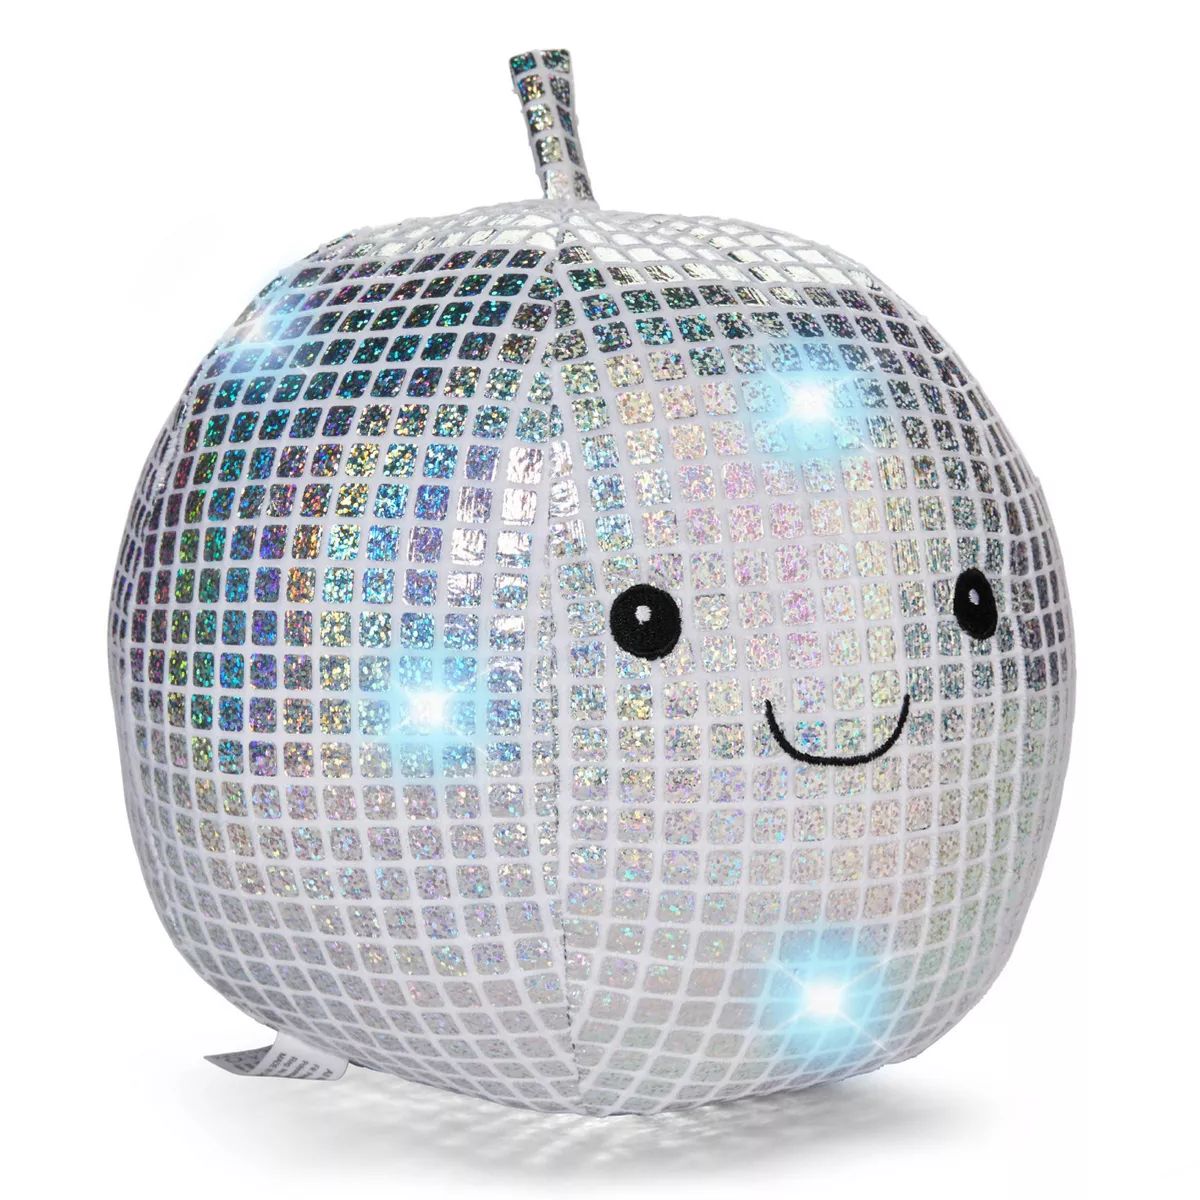 FAO Schwarz Glow Brights Plush with Lights and Sounds 9" Disco Ball | Target